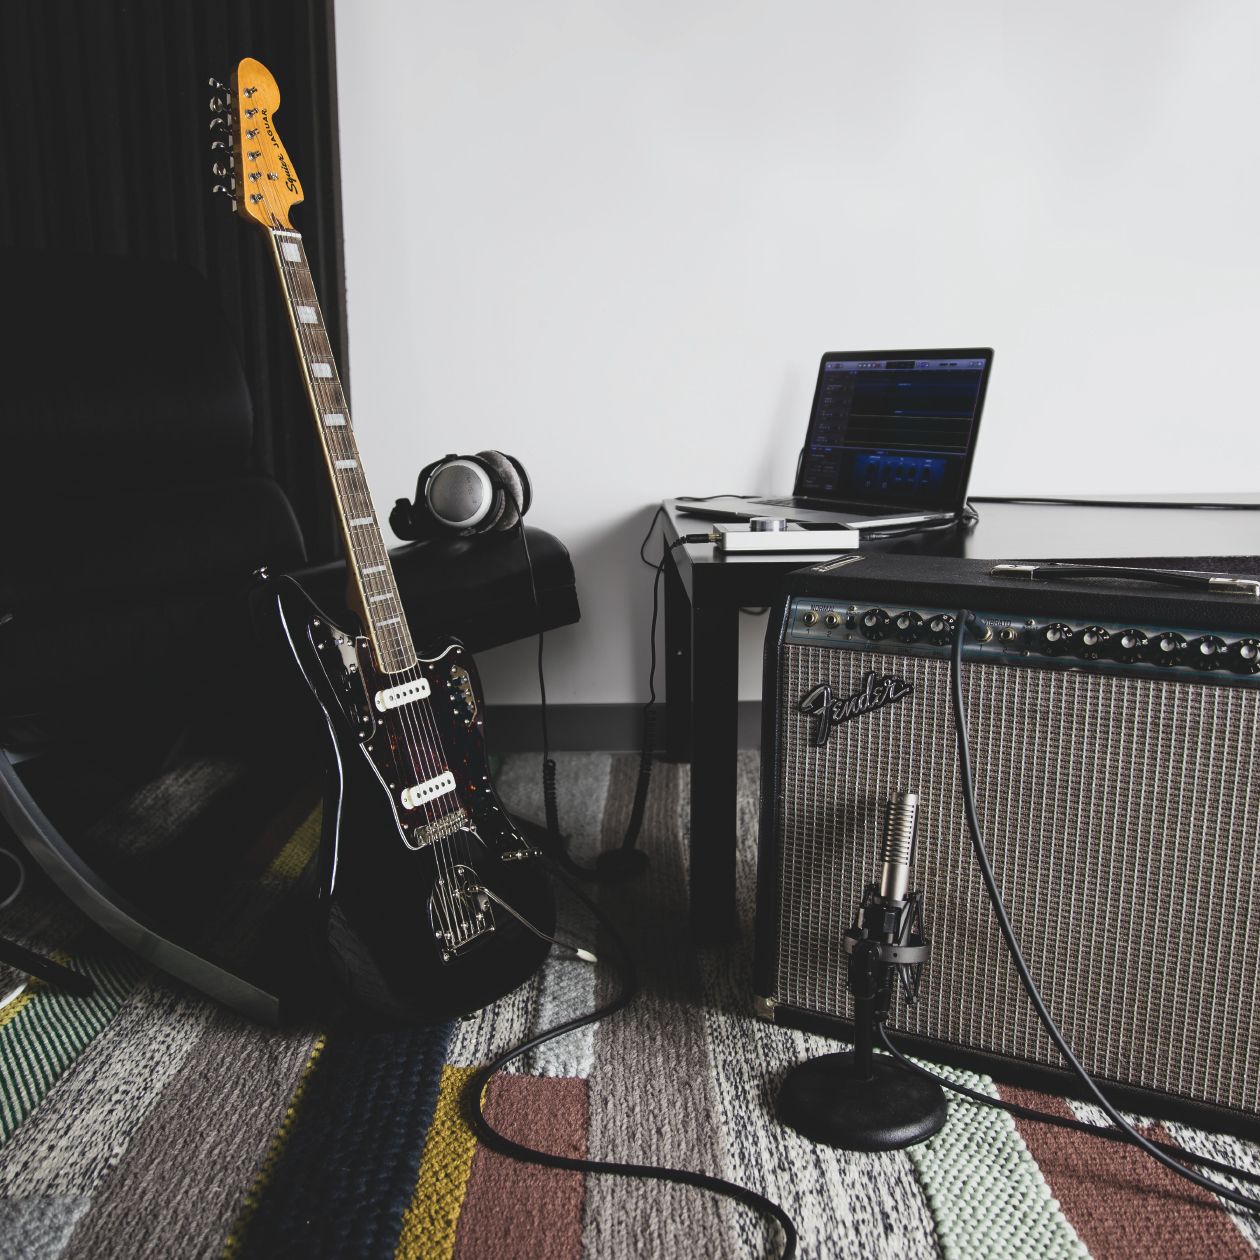 10 Recording Mistakes Guitarists Make (And How to Avoid Them)